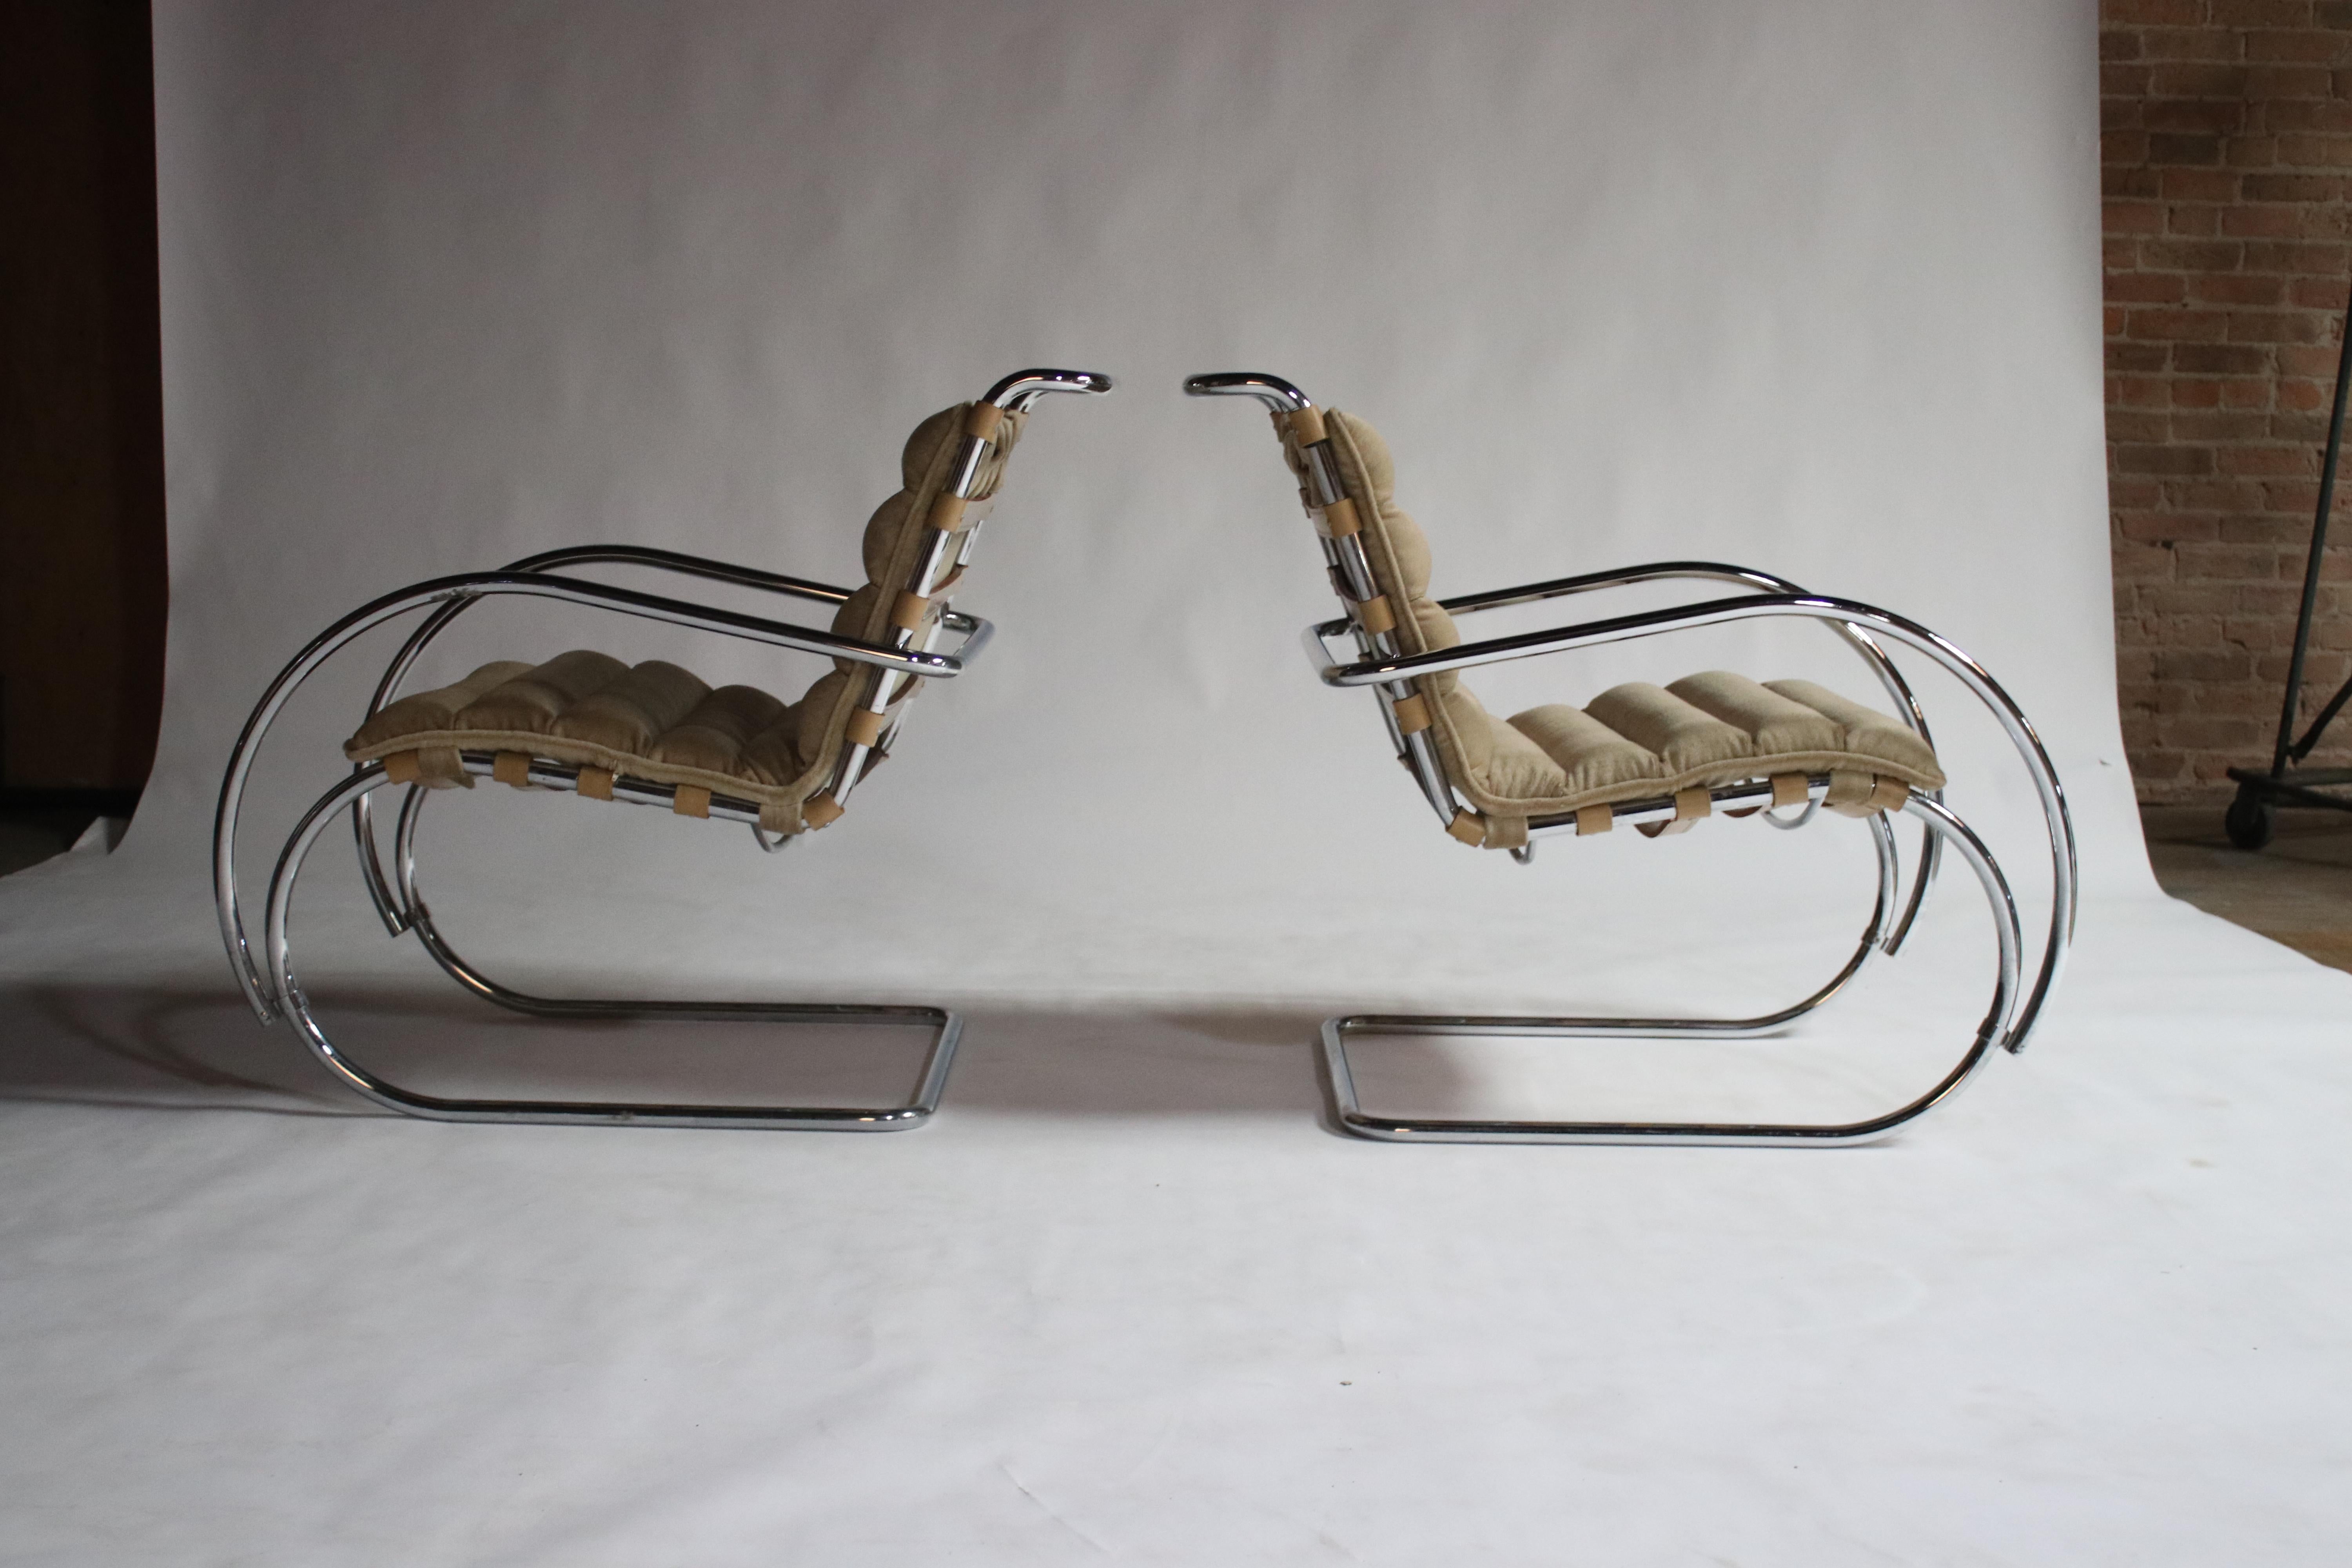 Pair of MR Lounge armchairs by Mies van der Rohe in original camel strap leather and polished chrome with newly upholstered camel color mohair pads.